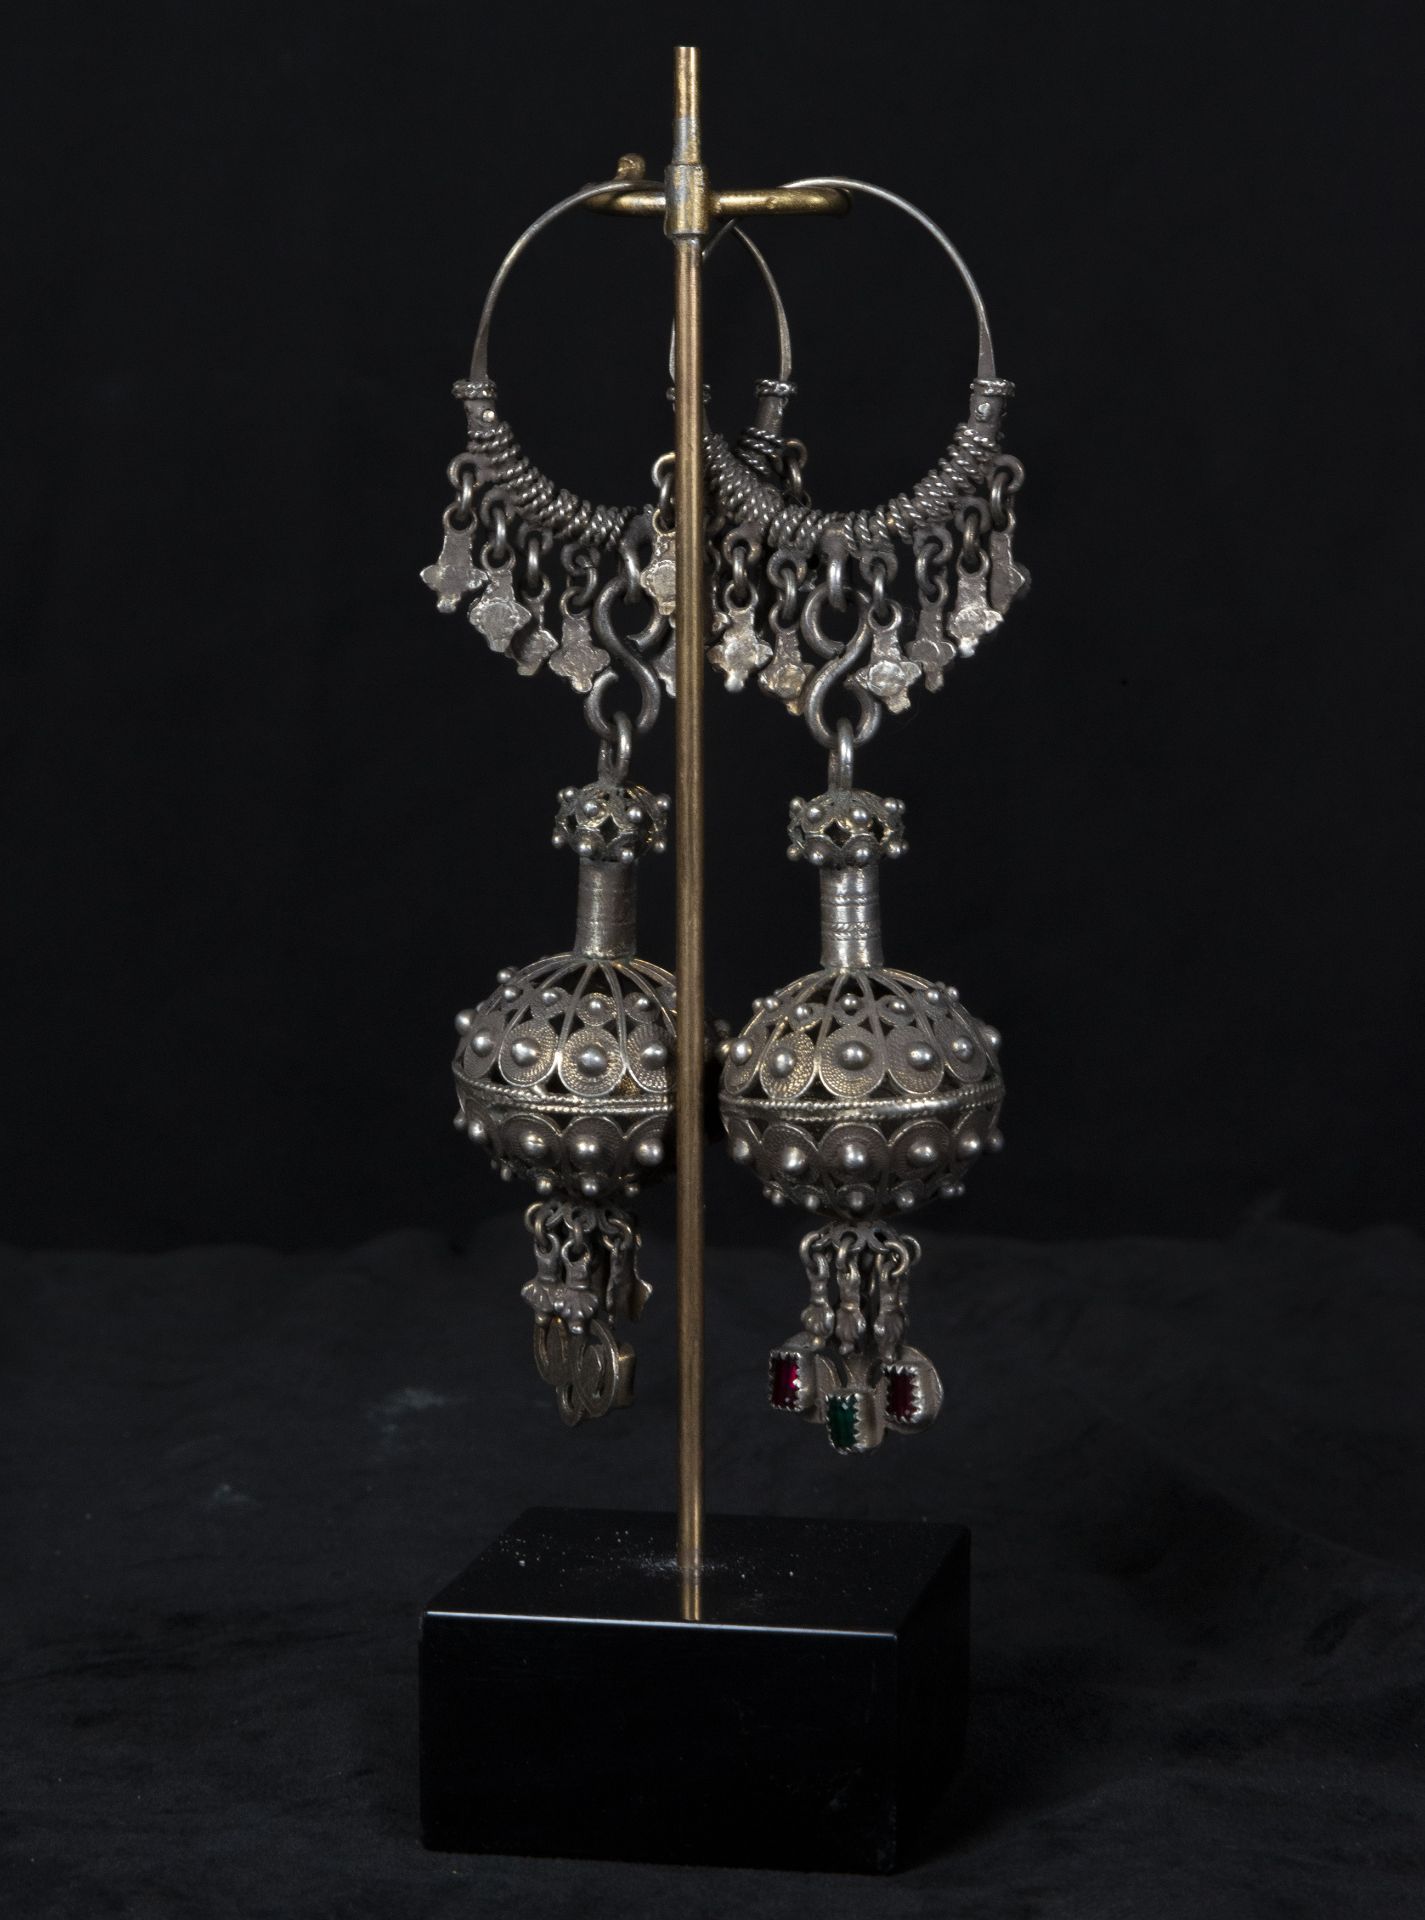 Beautiful Salamanca "charro" earrings in fine silver filigree from the 19th century - Image 2 of 2